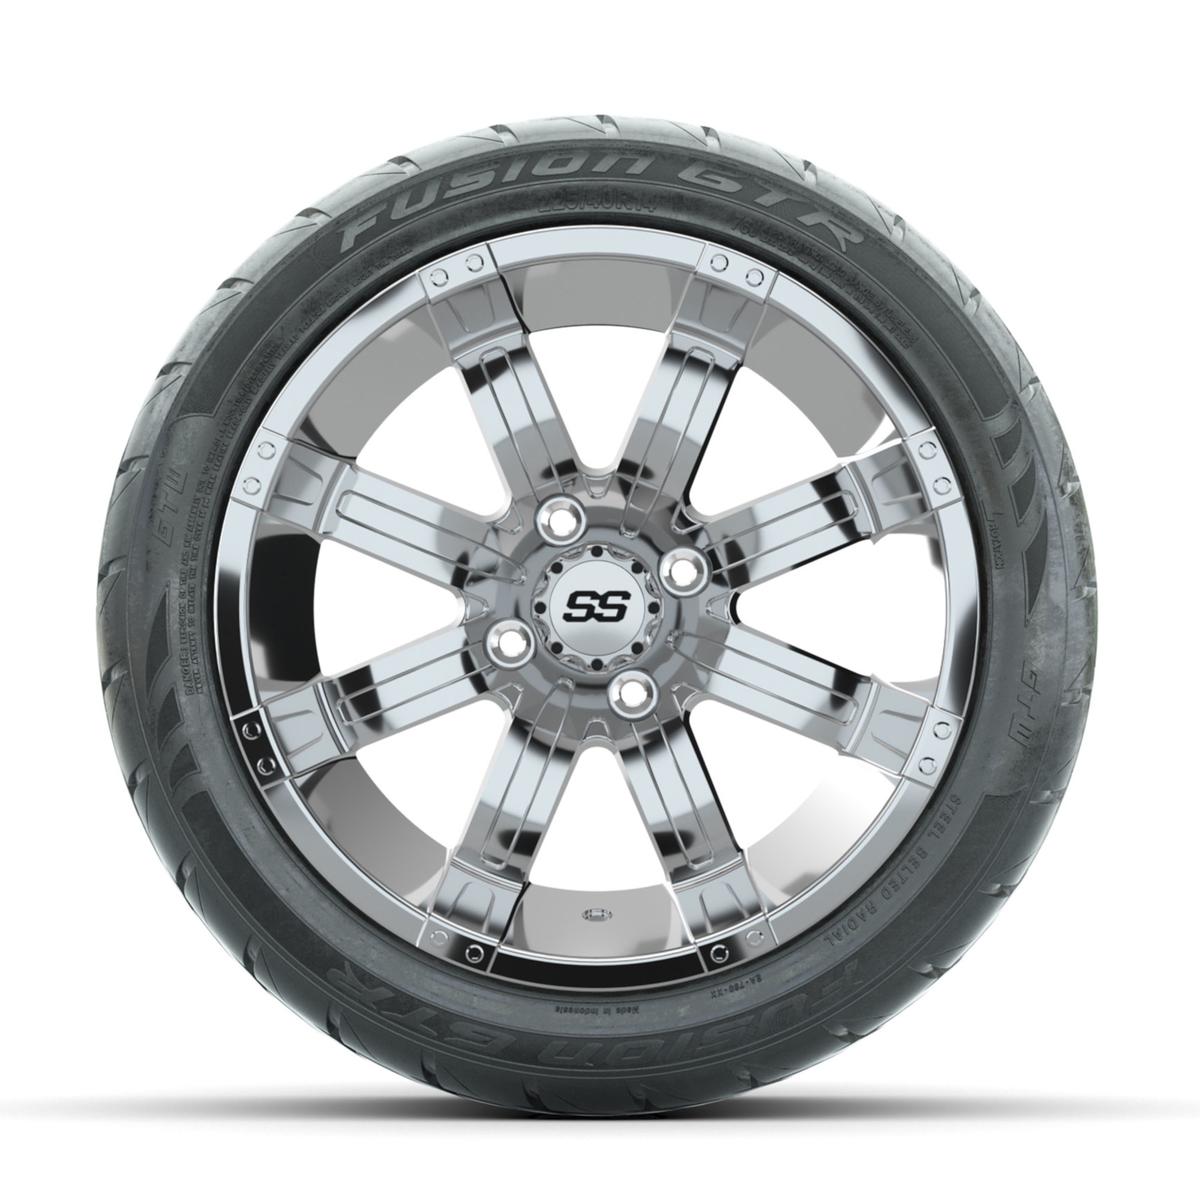 GTW Tempest Chrome 14 in Wheels with 225/40-R14 Fusion GTR Street Tires – Full Set